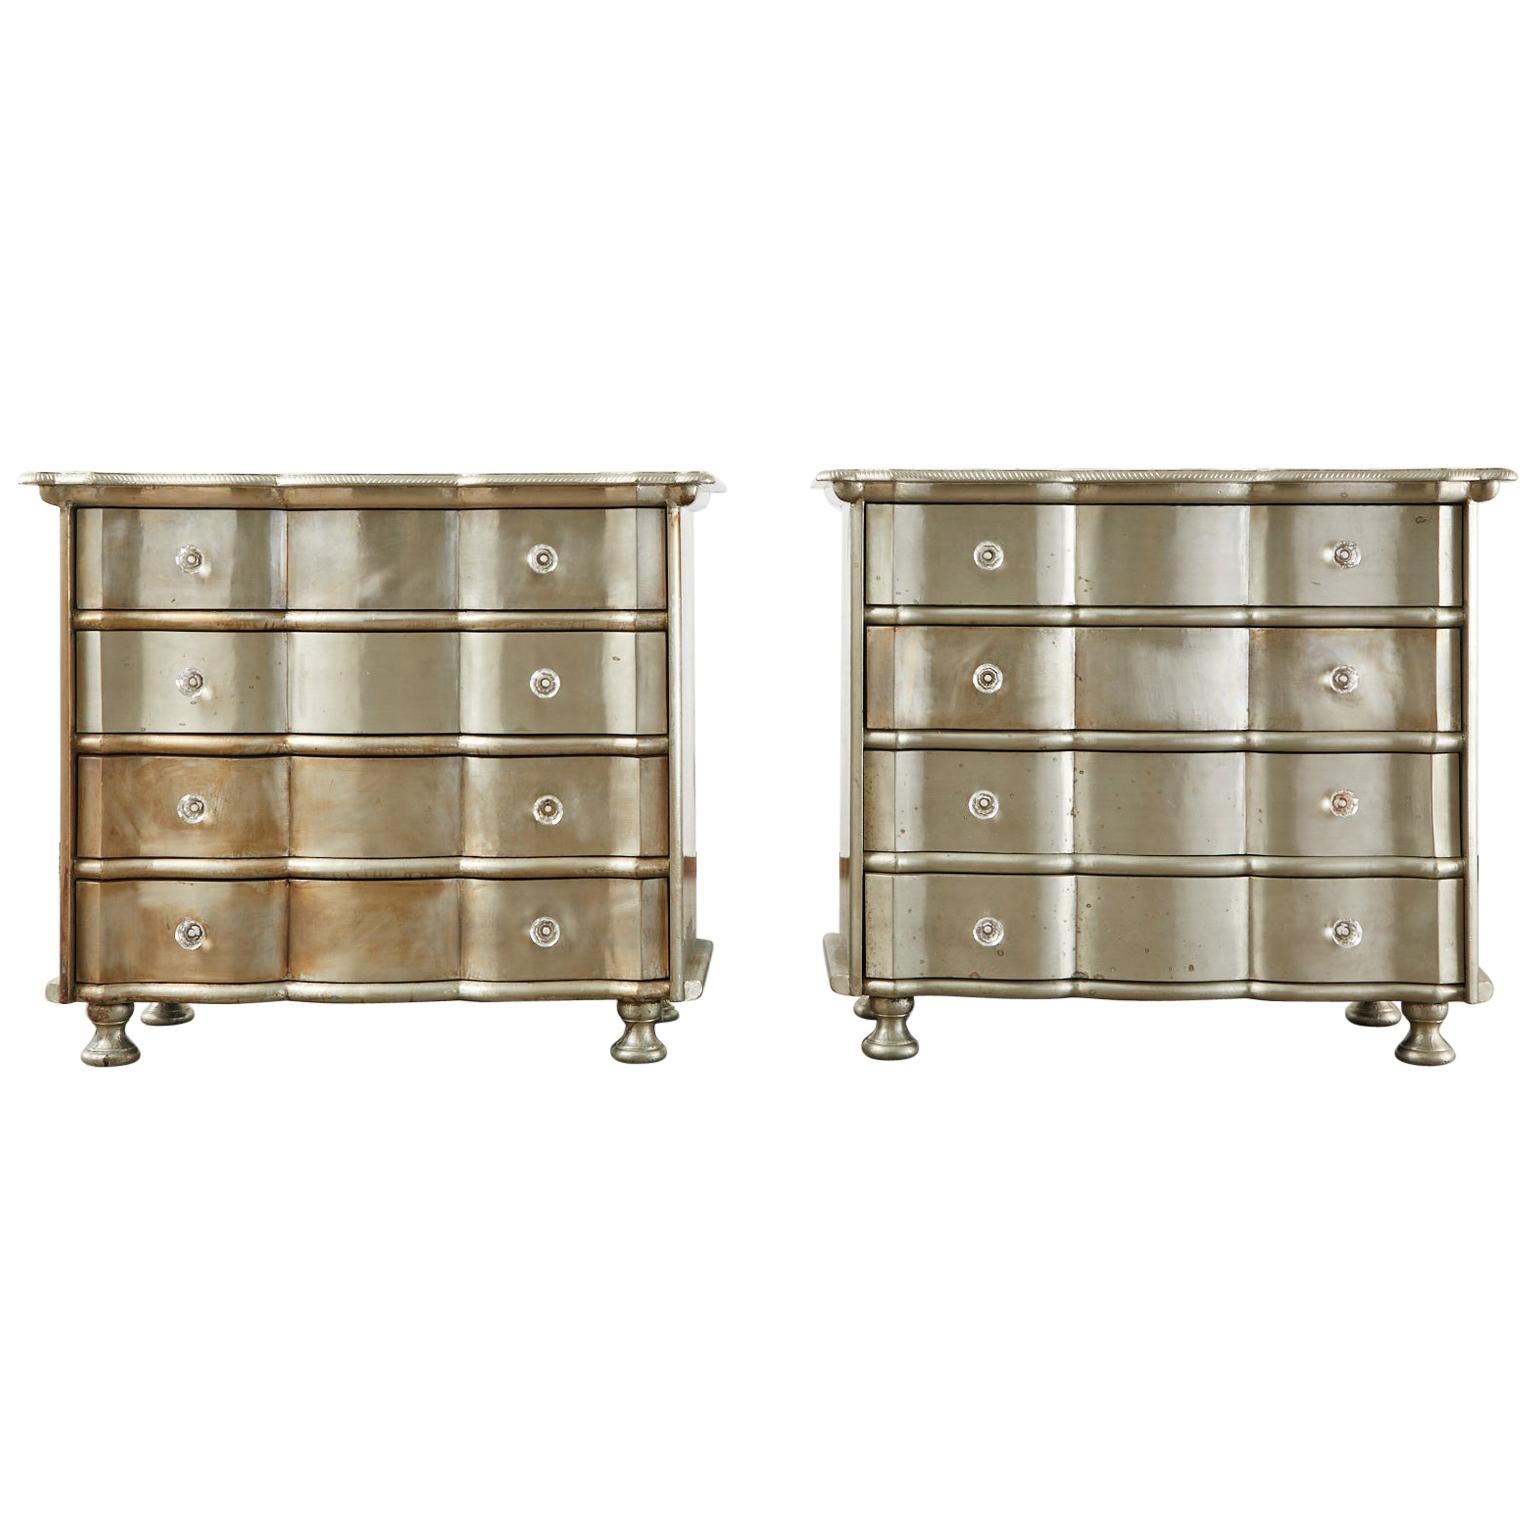 Pair of Zinc Metal Wrapped Commode Chests or Dressers